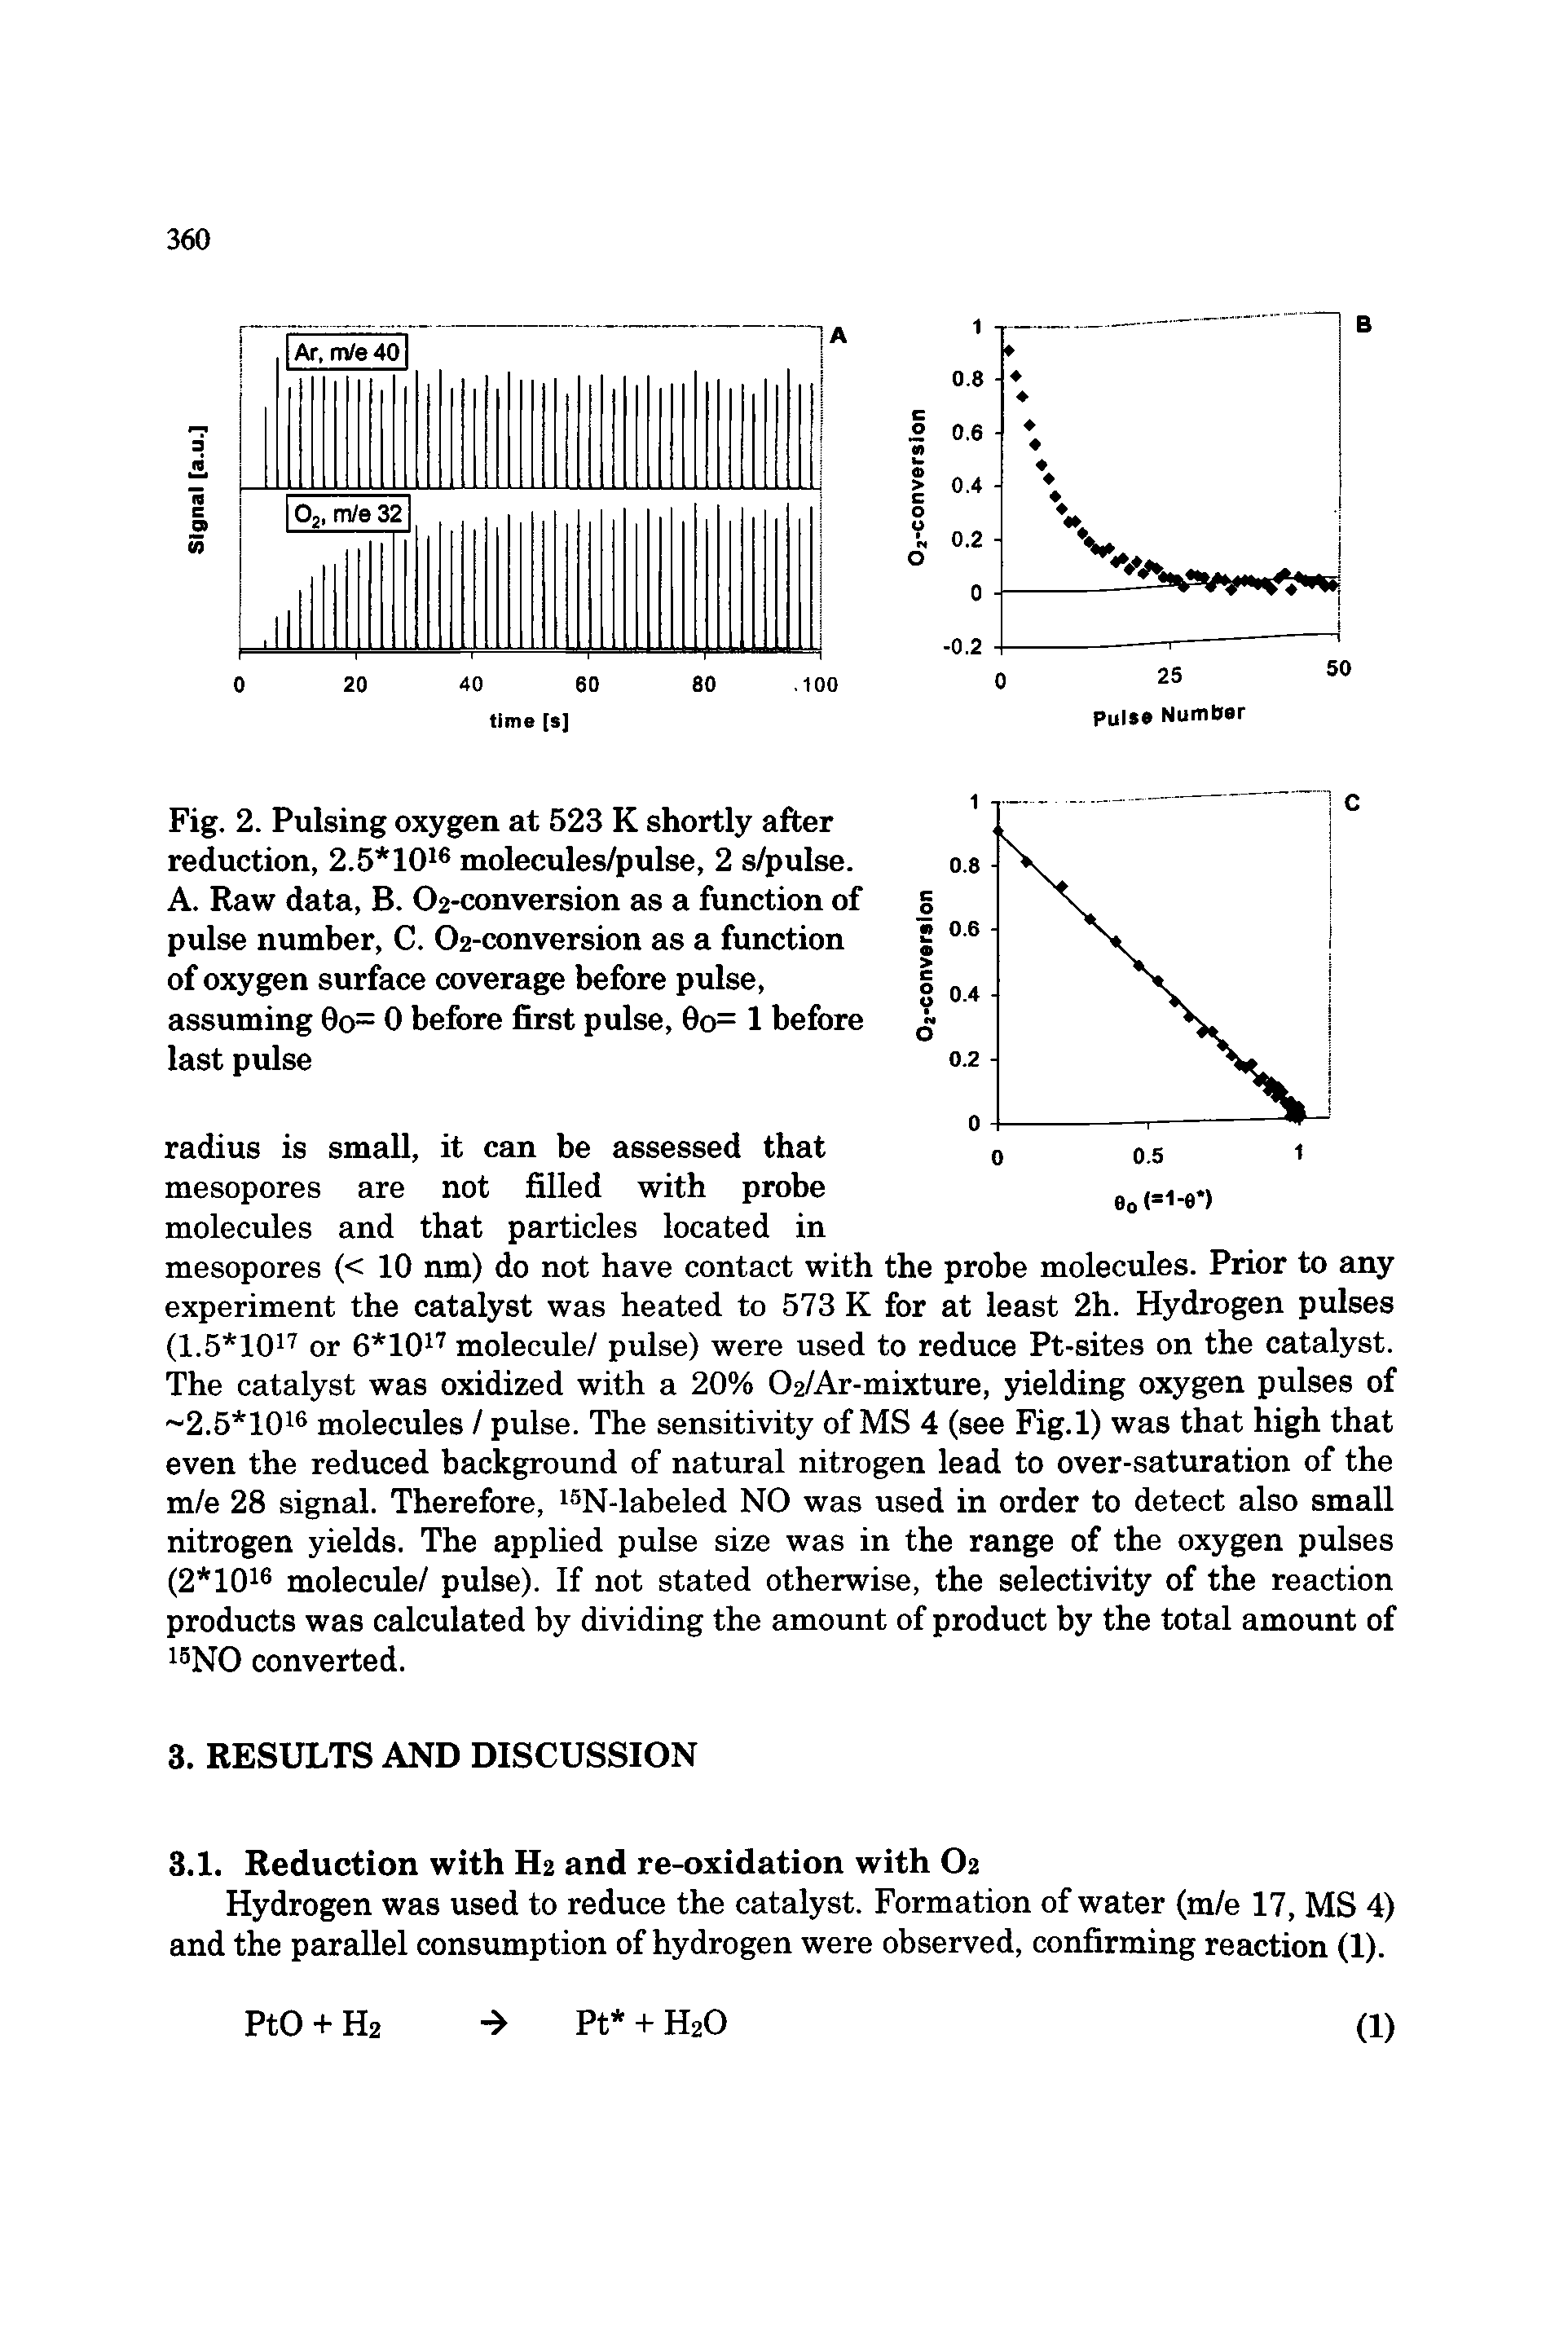 Fig. 2. Pxilsing oxygen at 523 K shortly after reduction, 2.5 10 molecules/pulse, 2 s/pulse. A. Raw data, B. 02-conversion as a function of pulse number, C. 02-conversion as a function of oxygen surface coverage before pulse, assuming 0o= 0 before first pulse, 6o= 1 before last pulse...